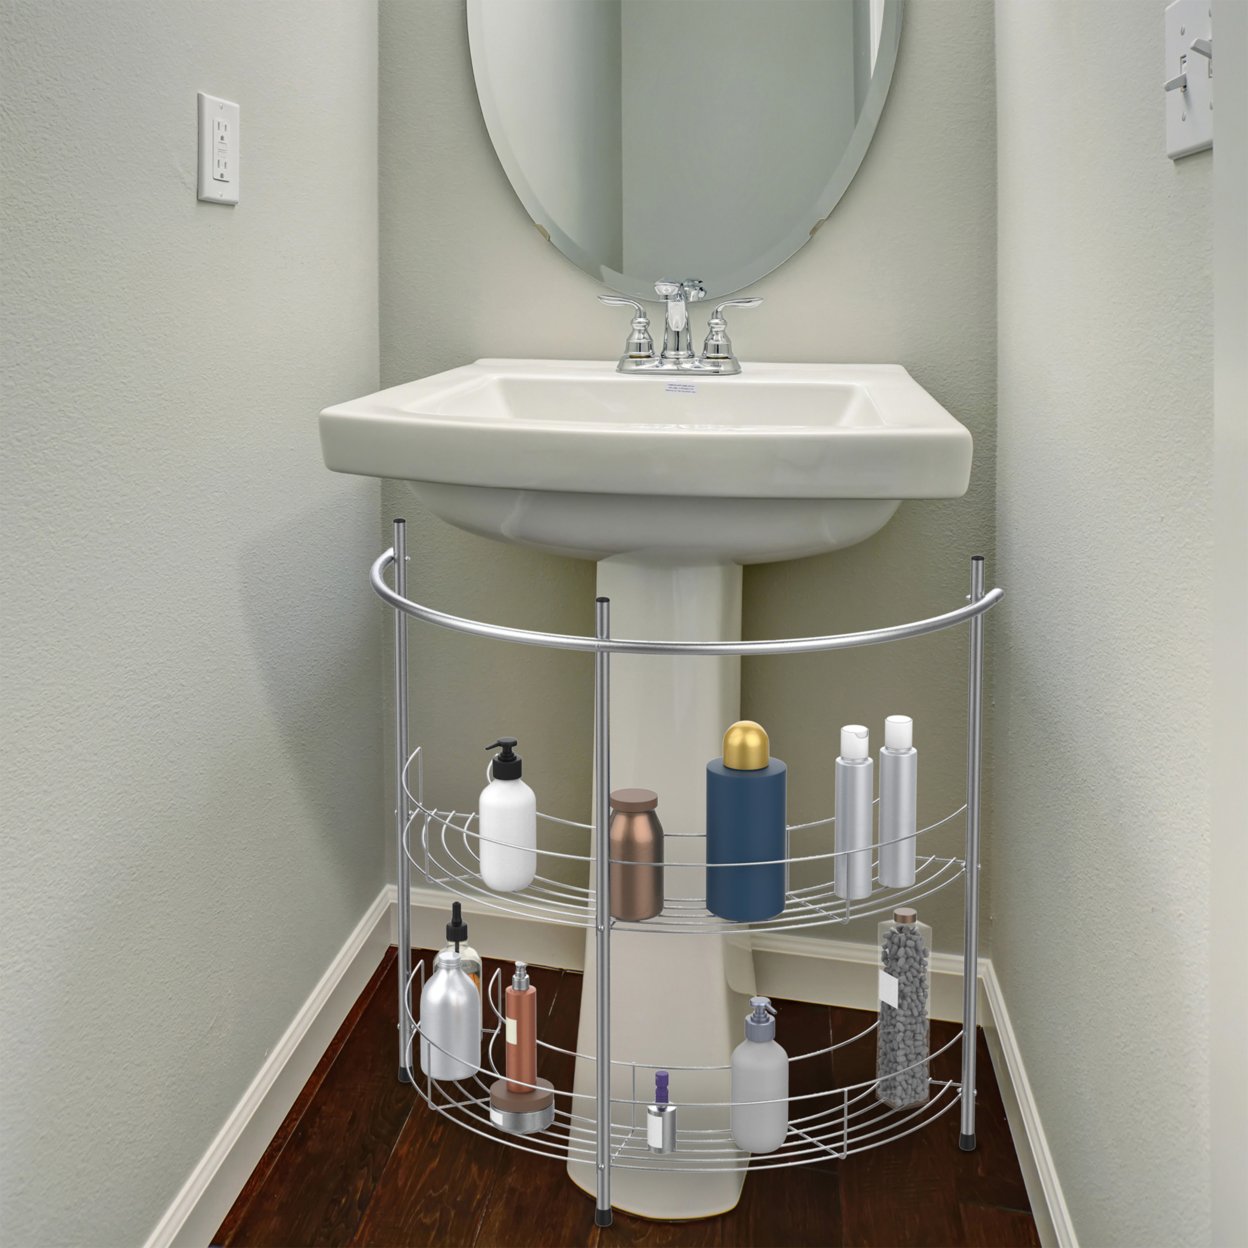 Pedestal Sink Organizer Compact Under The Sink Rack With 2 Storage Shelves And Towel Holder